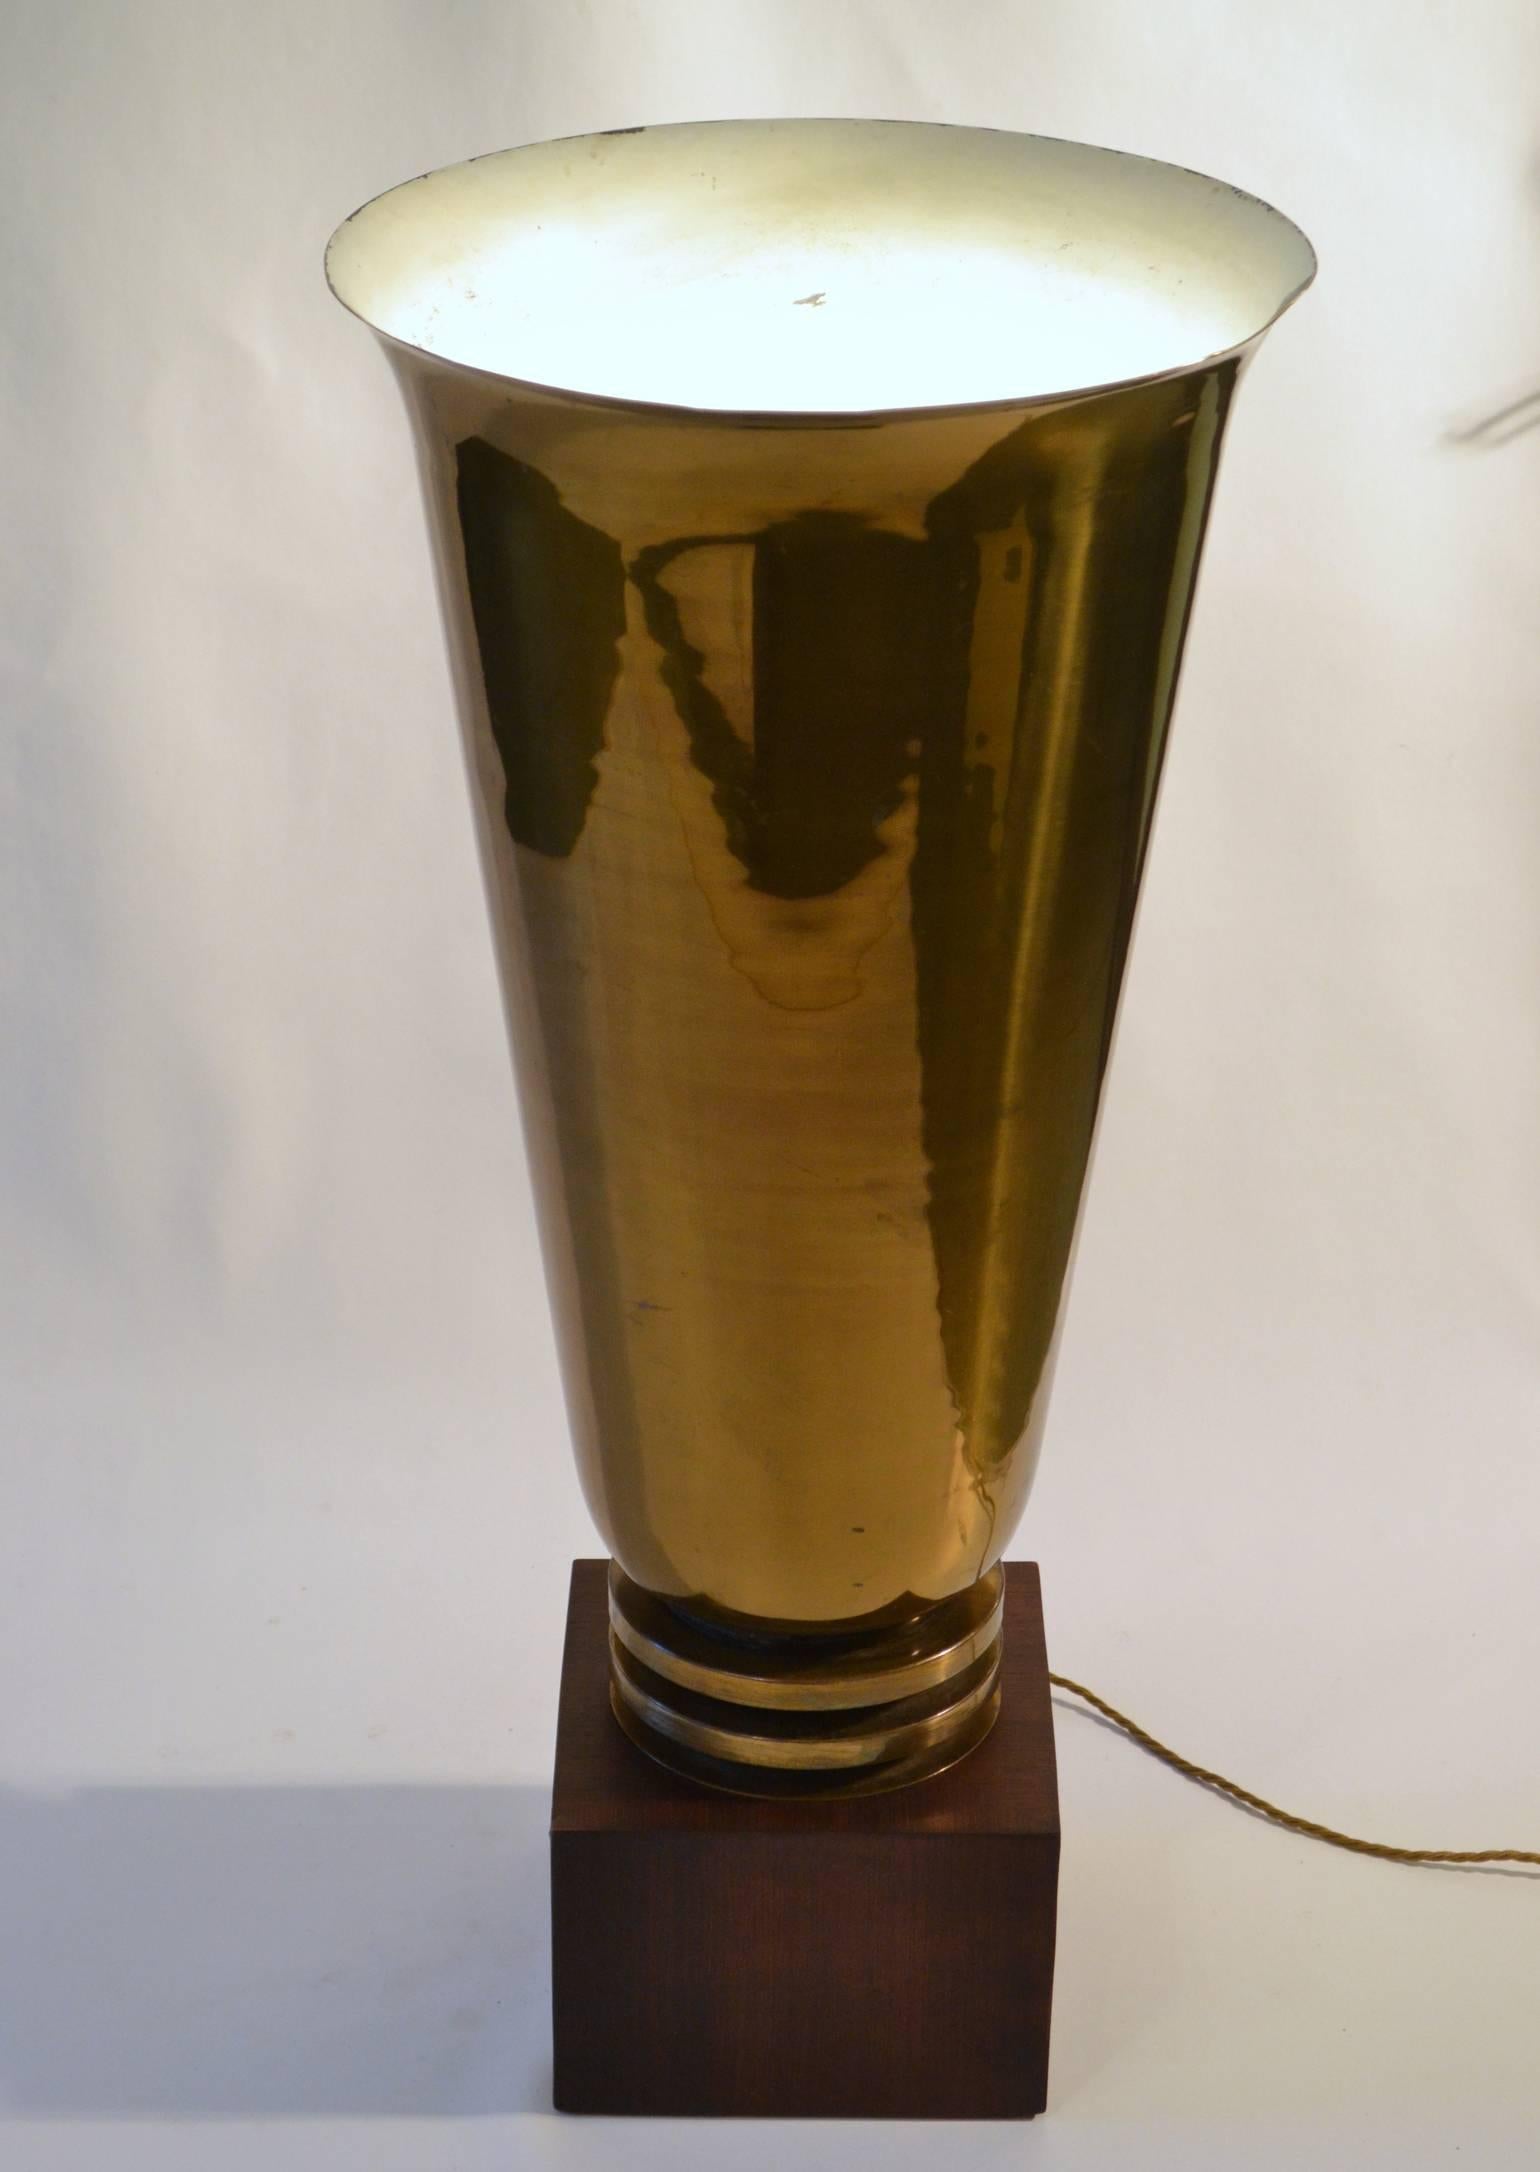 Spun Large Art Deco Torchiere Lamp in Brass from France, 1920s